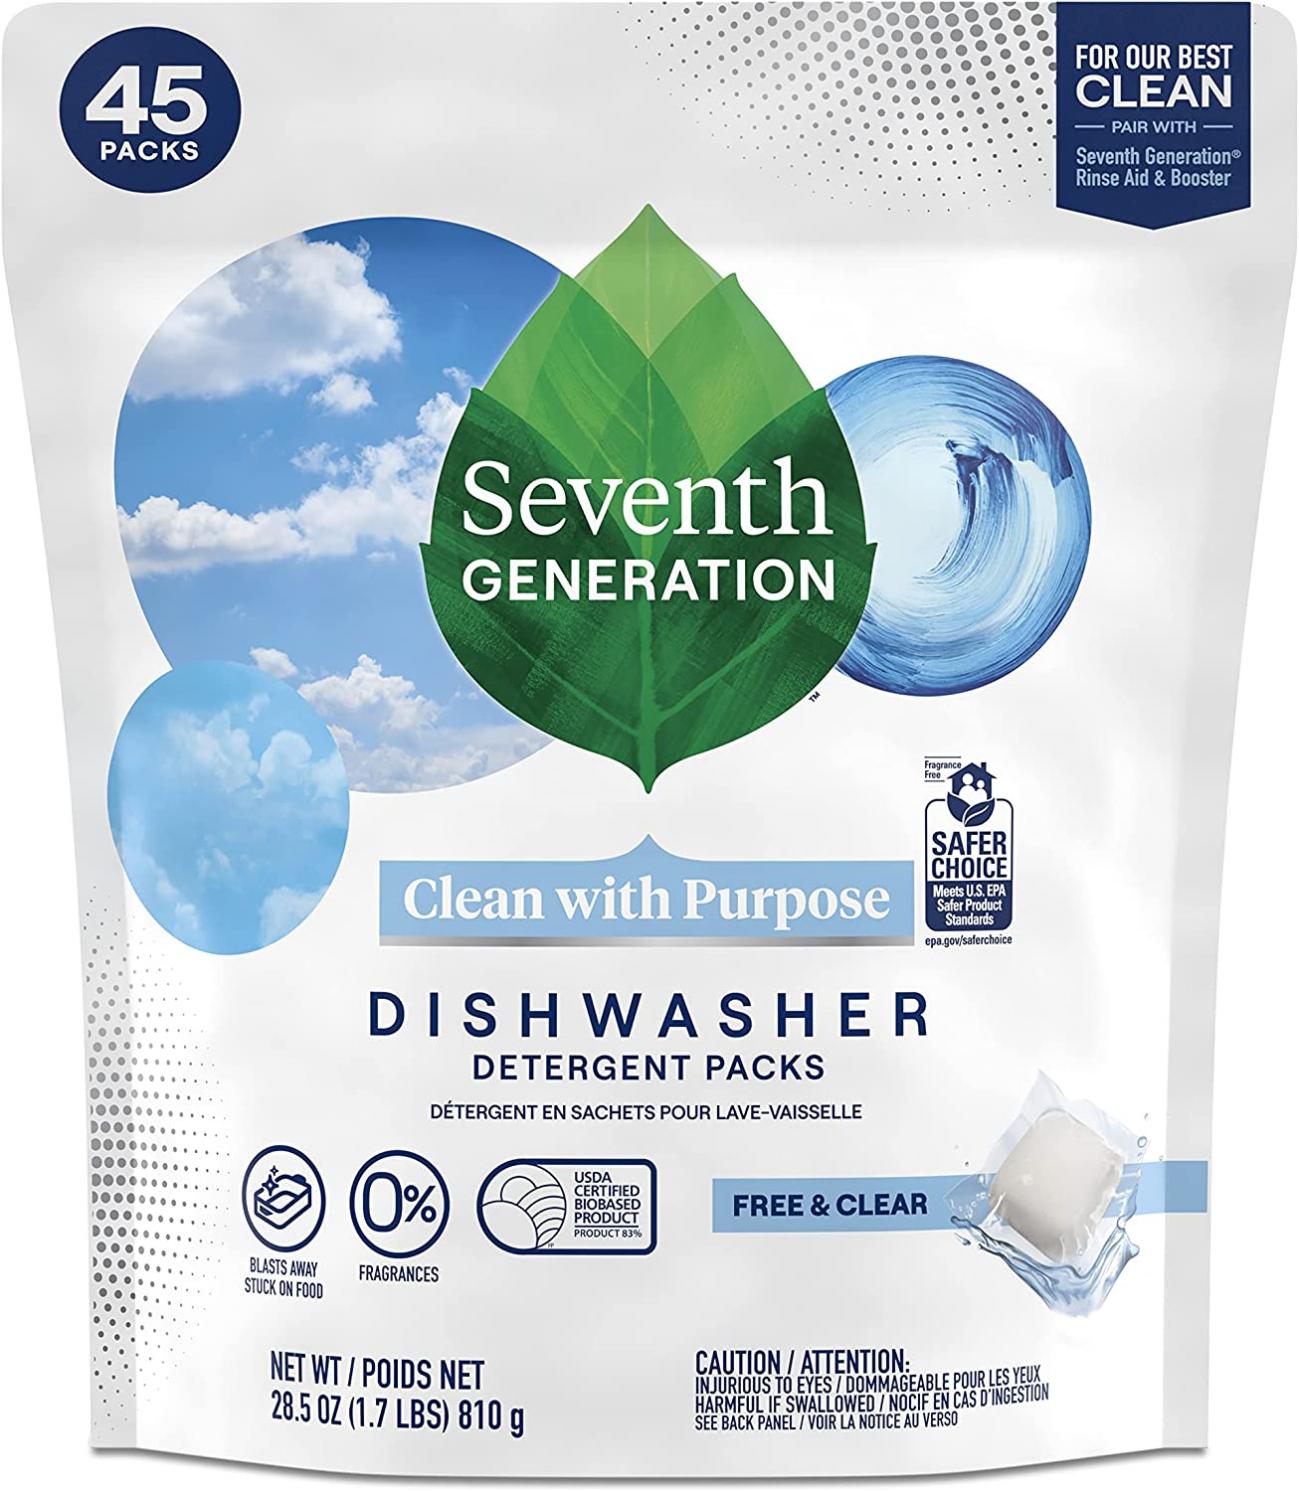 Seventh Generation Dishwasher Detergent Packs for Sparkling Dishes Free & Clear Dishwasher Tabs 45 Count